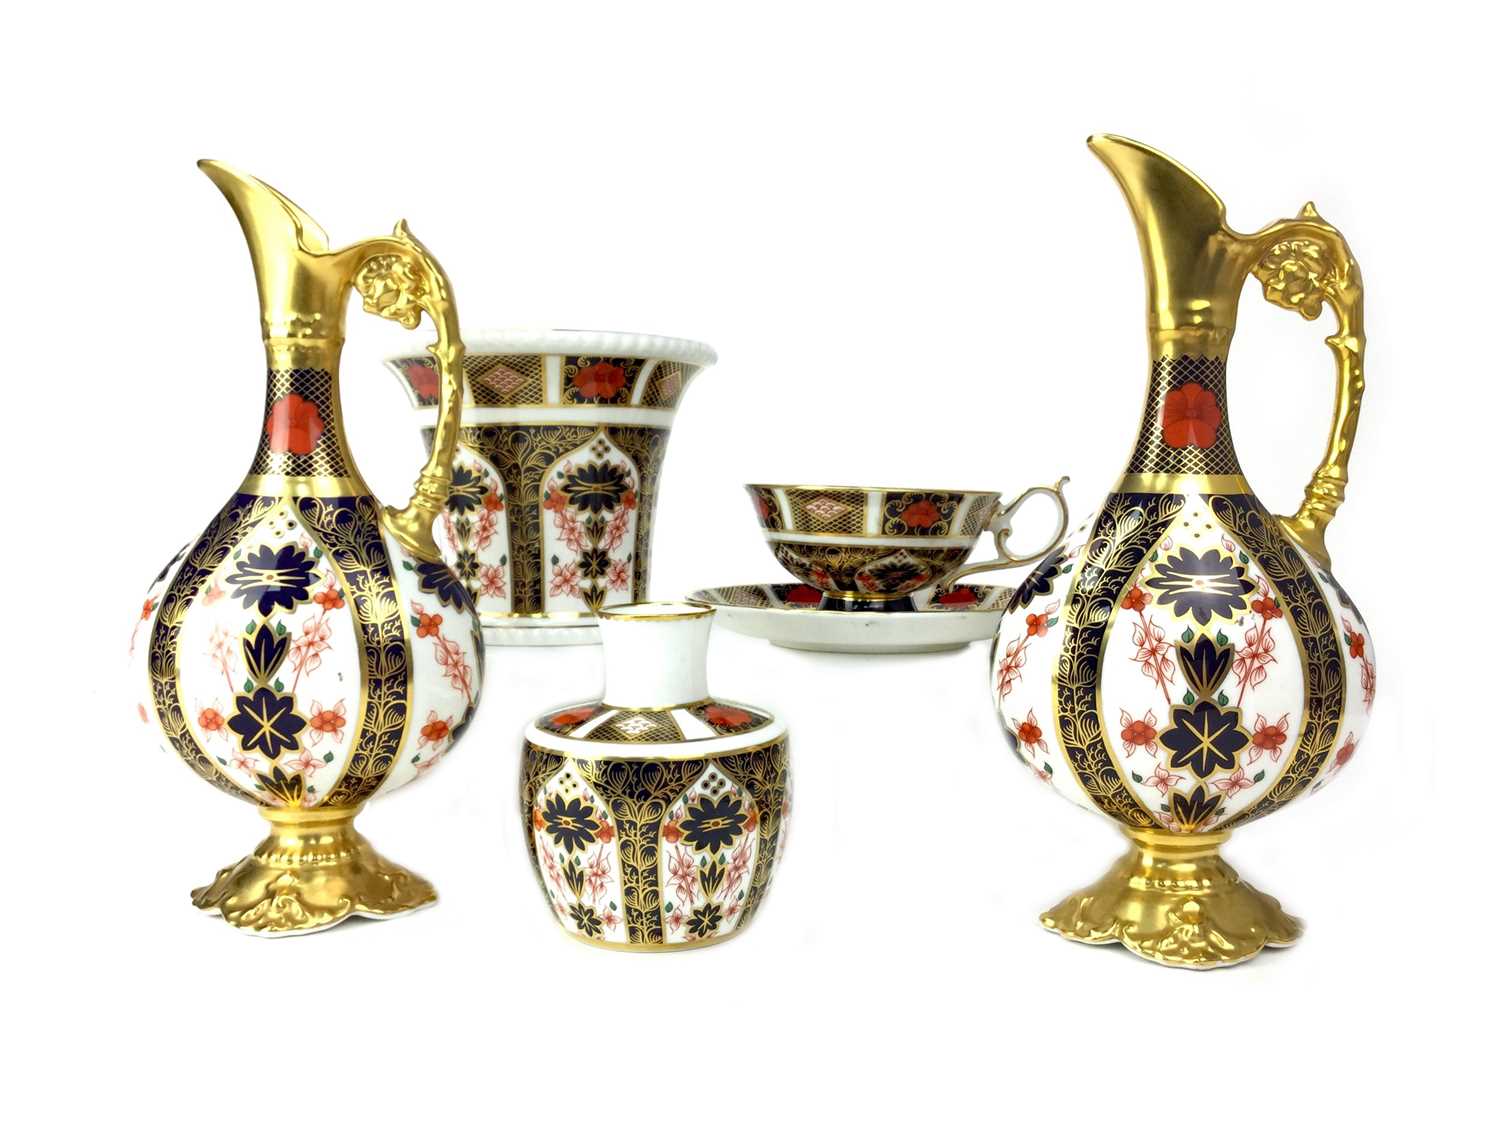 Lot 1013 - A PAIR OF ROYAL CROWN DERBY EWERS, VASES, CUP AND SAUCER